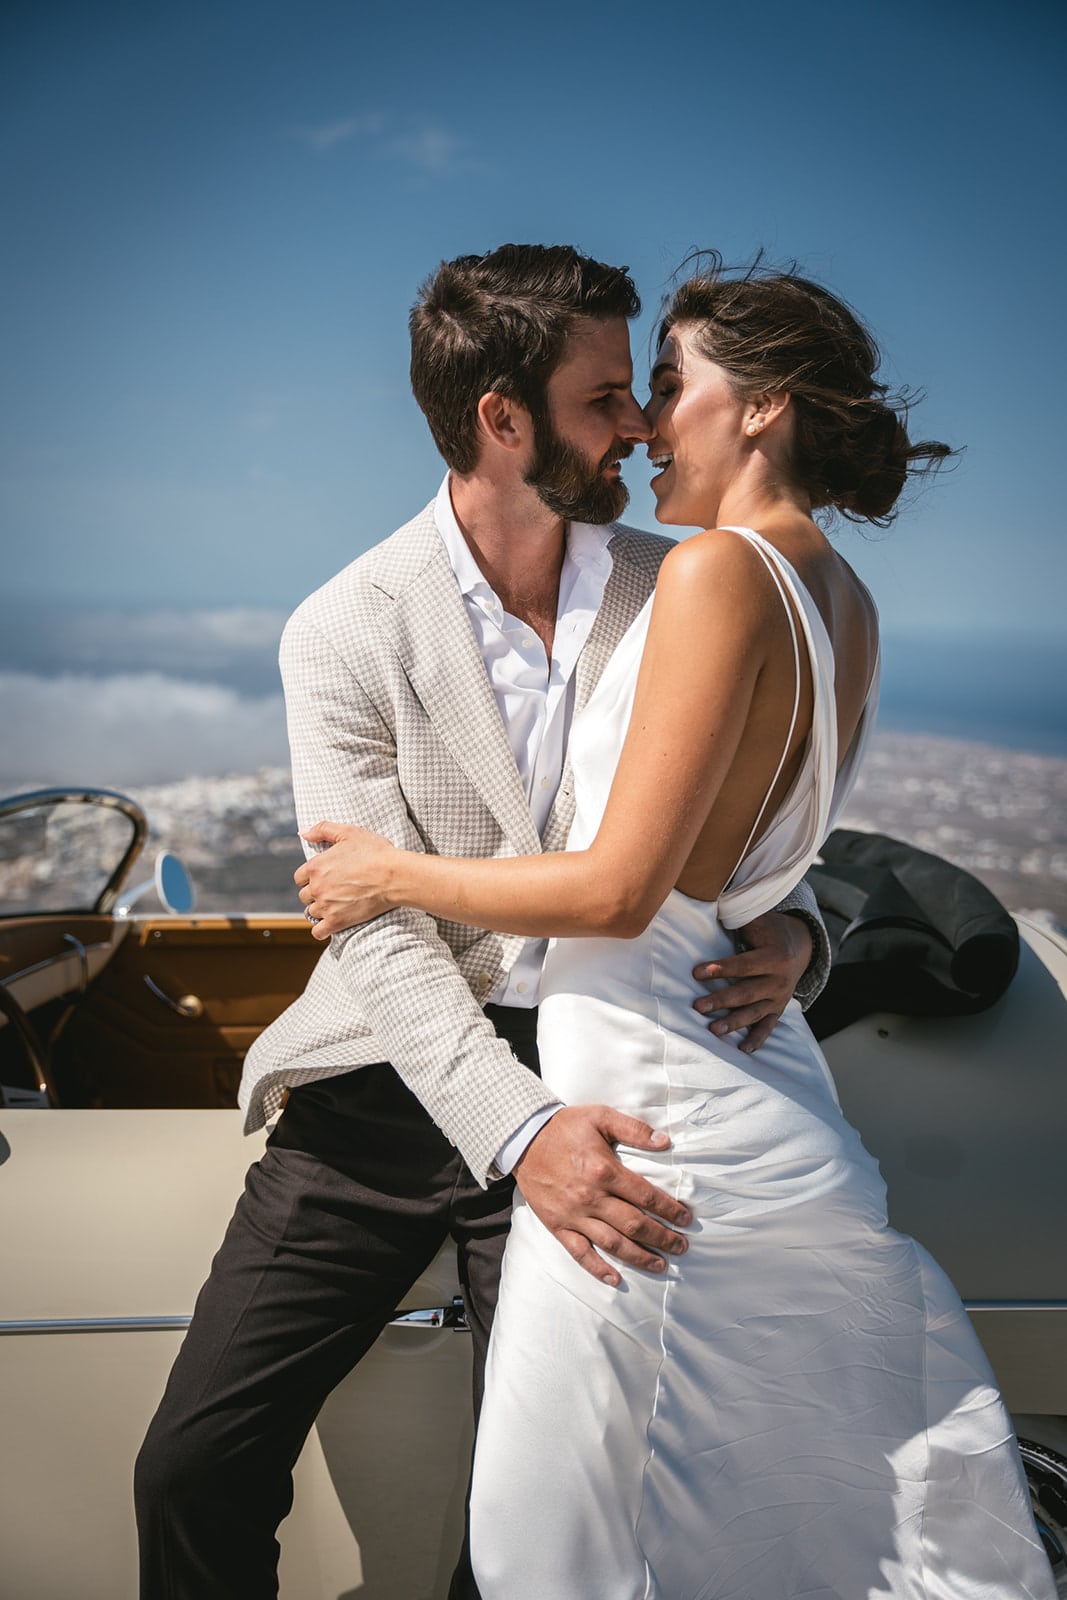 With the island at their feet, they share a kiss, cocooned in the vintage car’s allure.